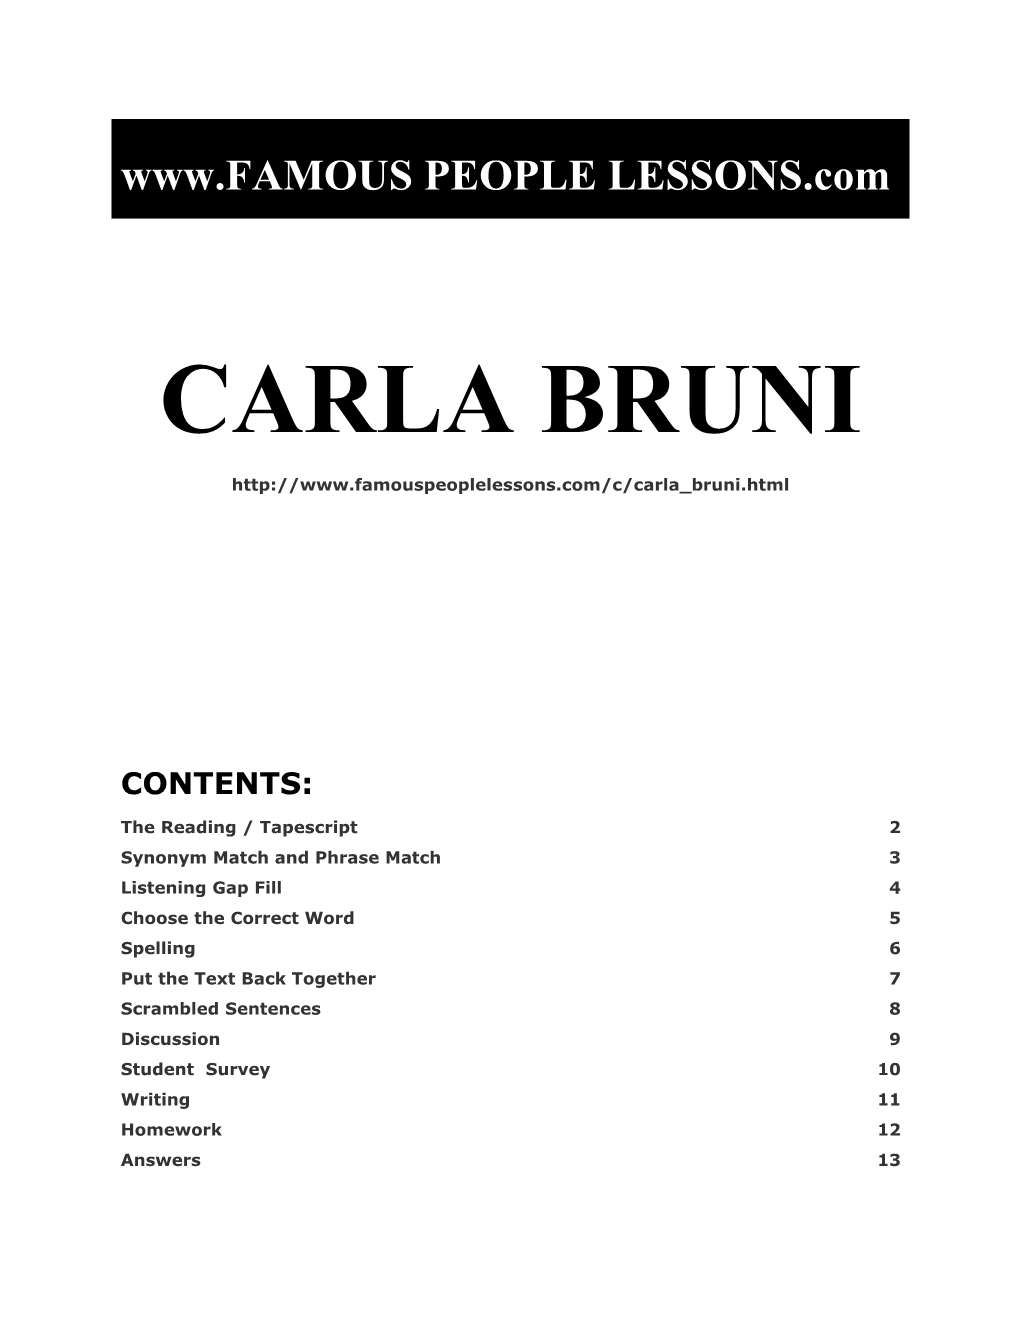 Famous People Lessons - Carla Bruni